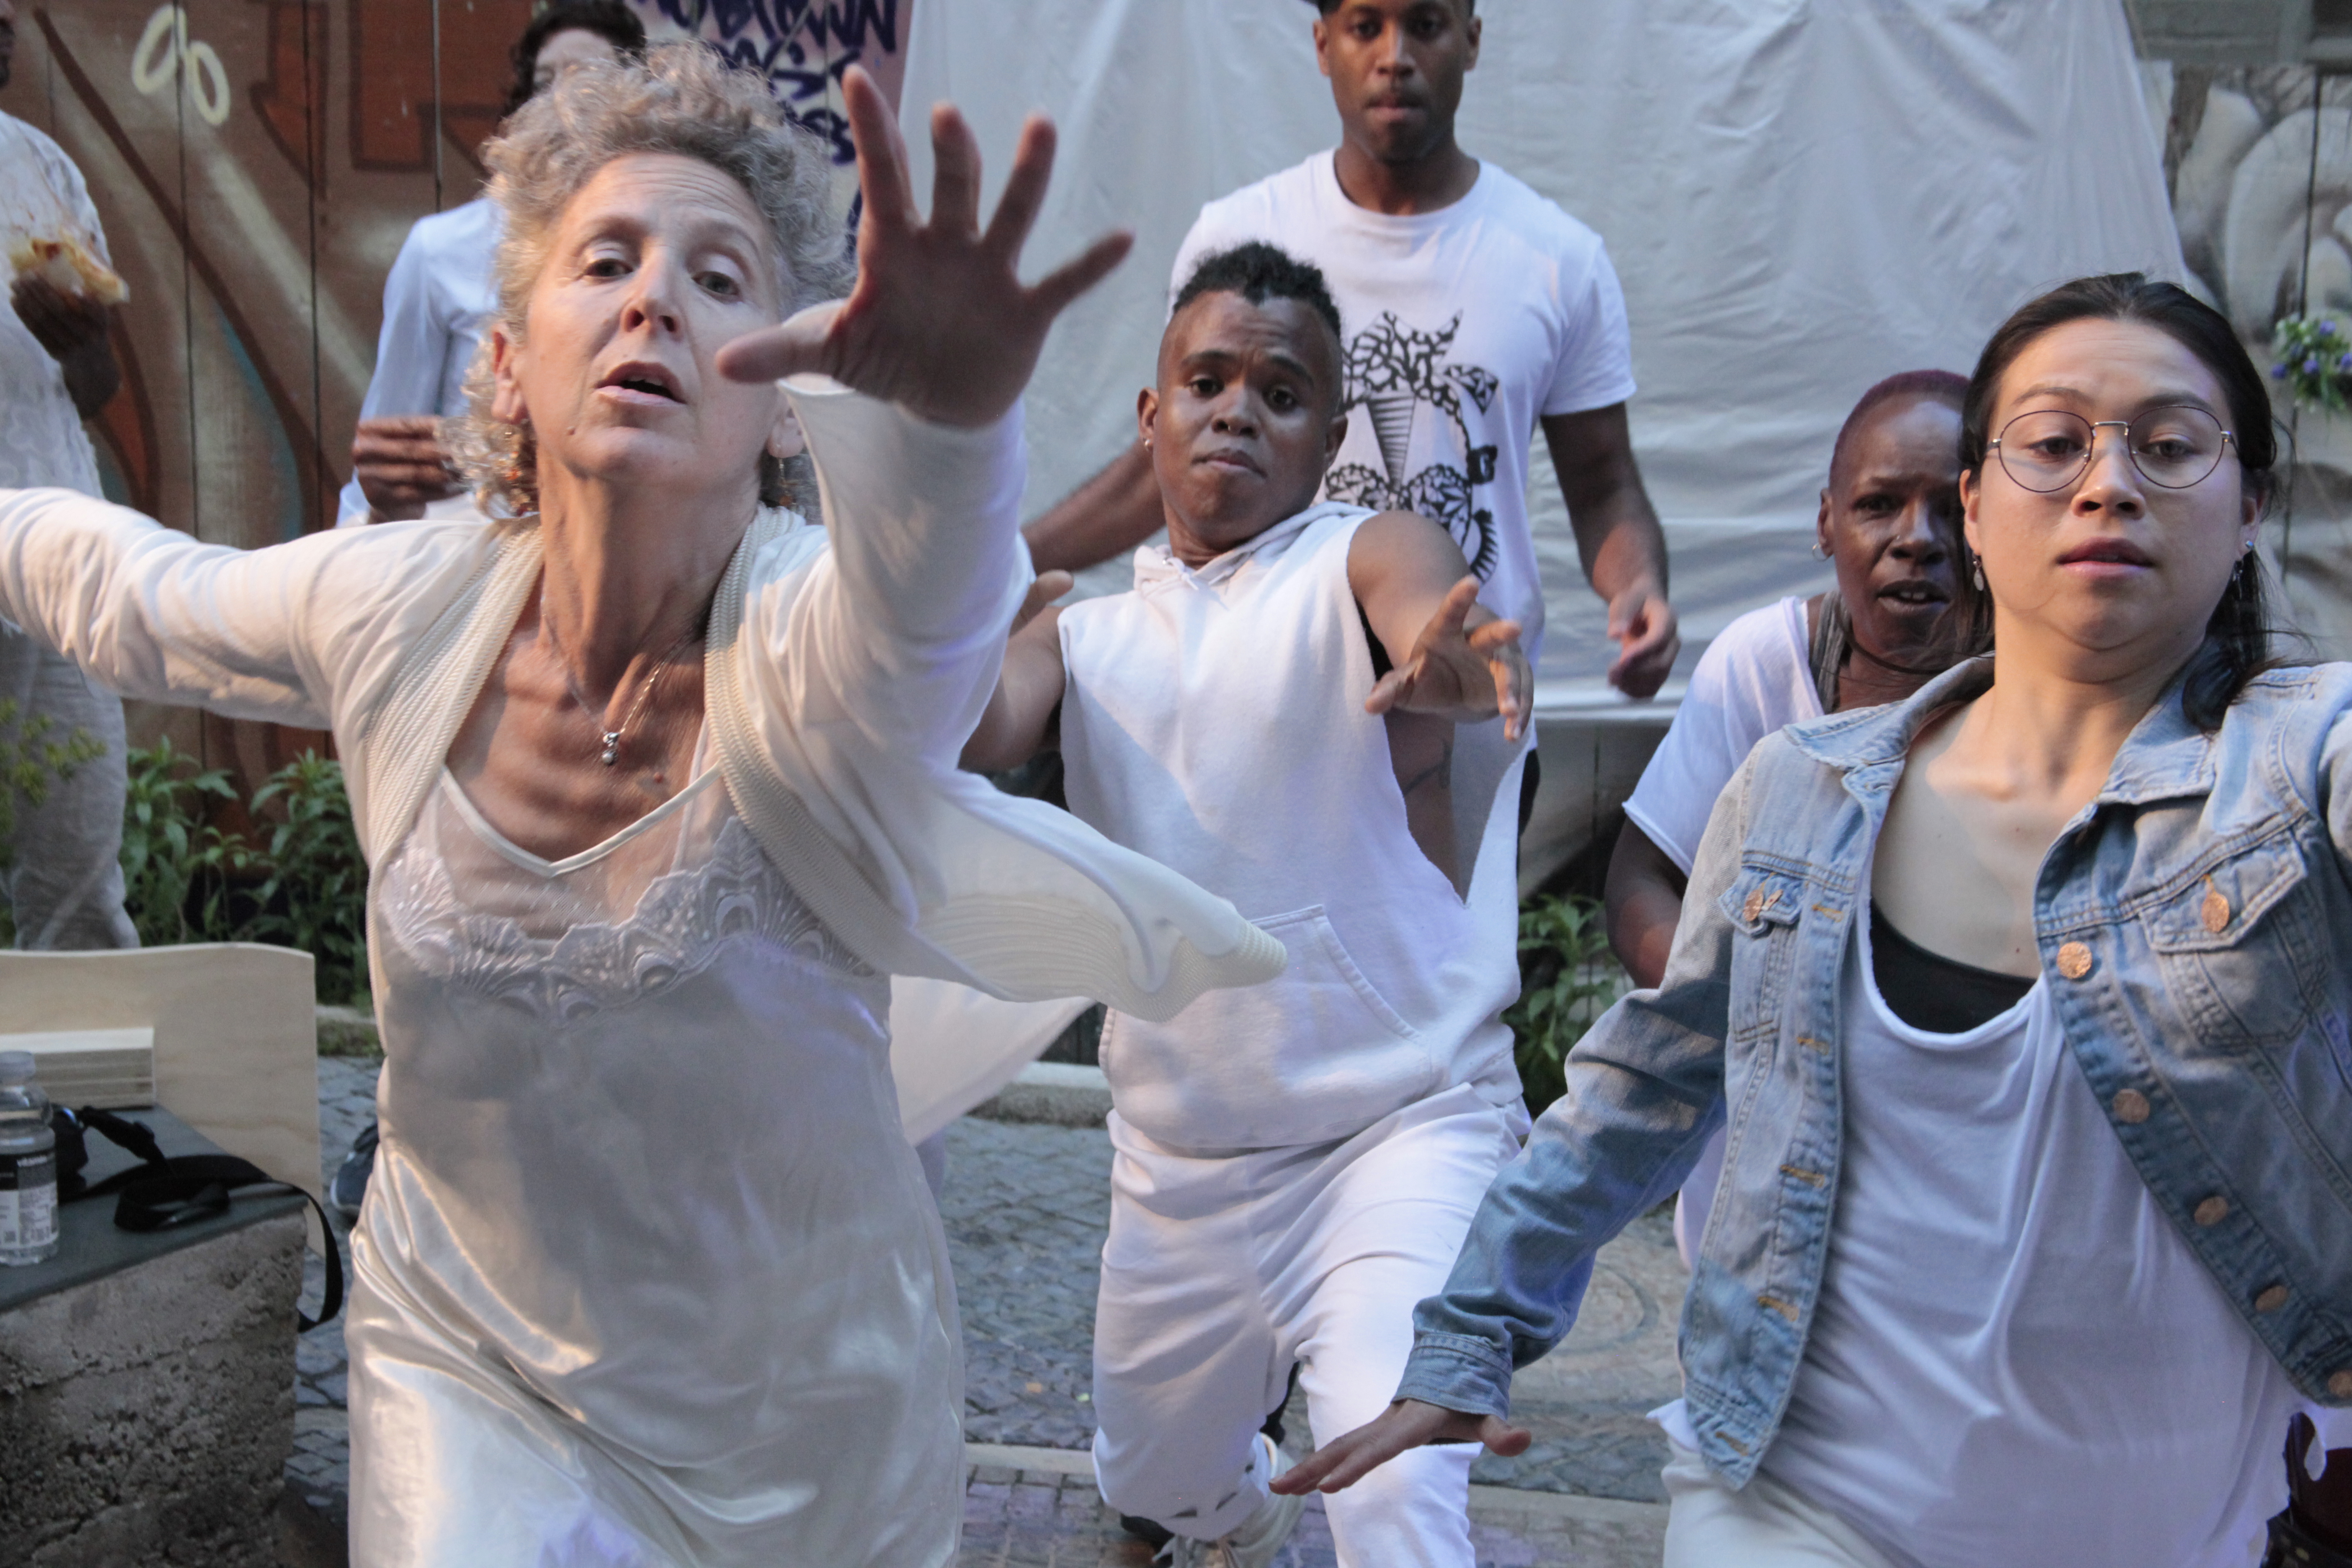 Dancers dressed in white performing in outdoor space reaching out towards the camera